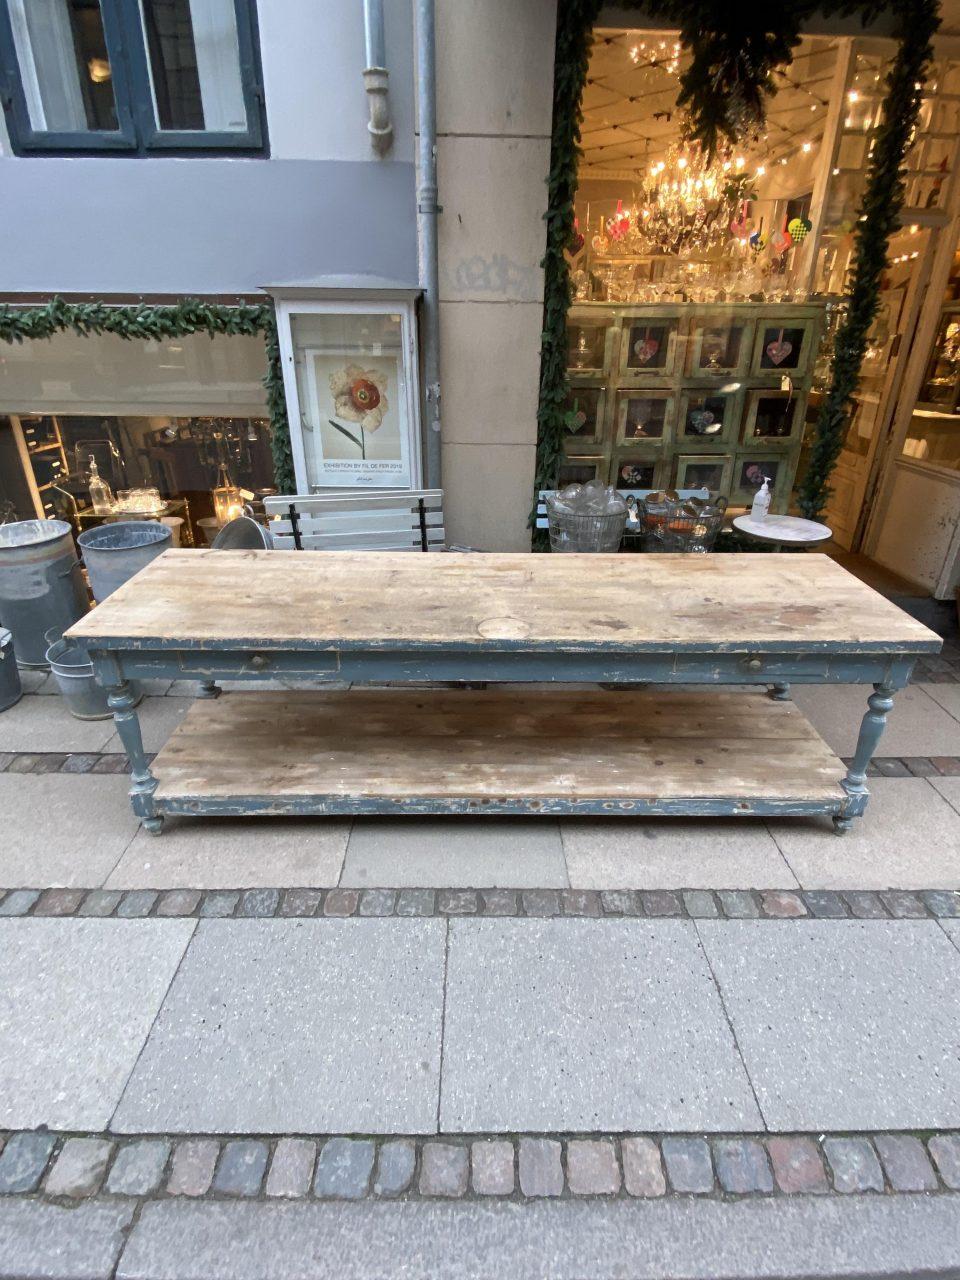 Beautiful antique French console / drapery table, consisting of a shelf underneath going its full length, and two drawers. Circa year 1900, and originally boutique inventory furniture.

The surface is in a genuine raw and rustic wood, and with a